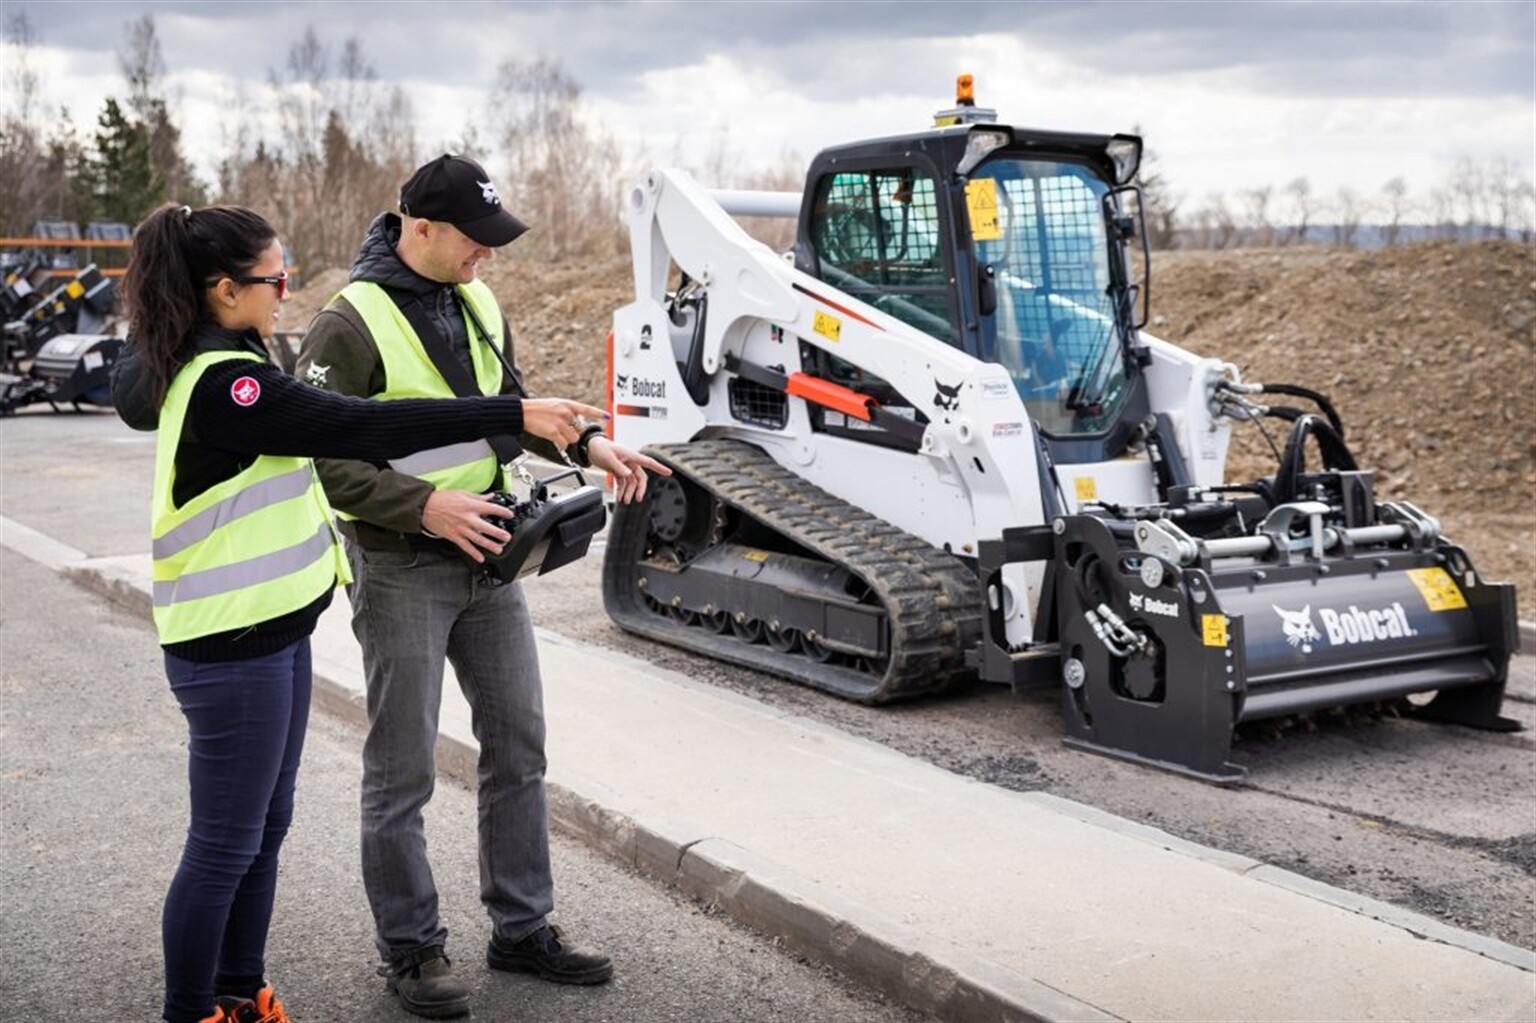 New Remote Control Launch for Bobcat Loaders